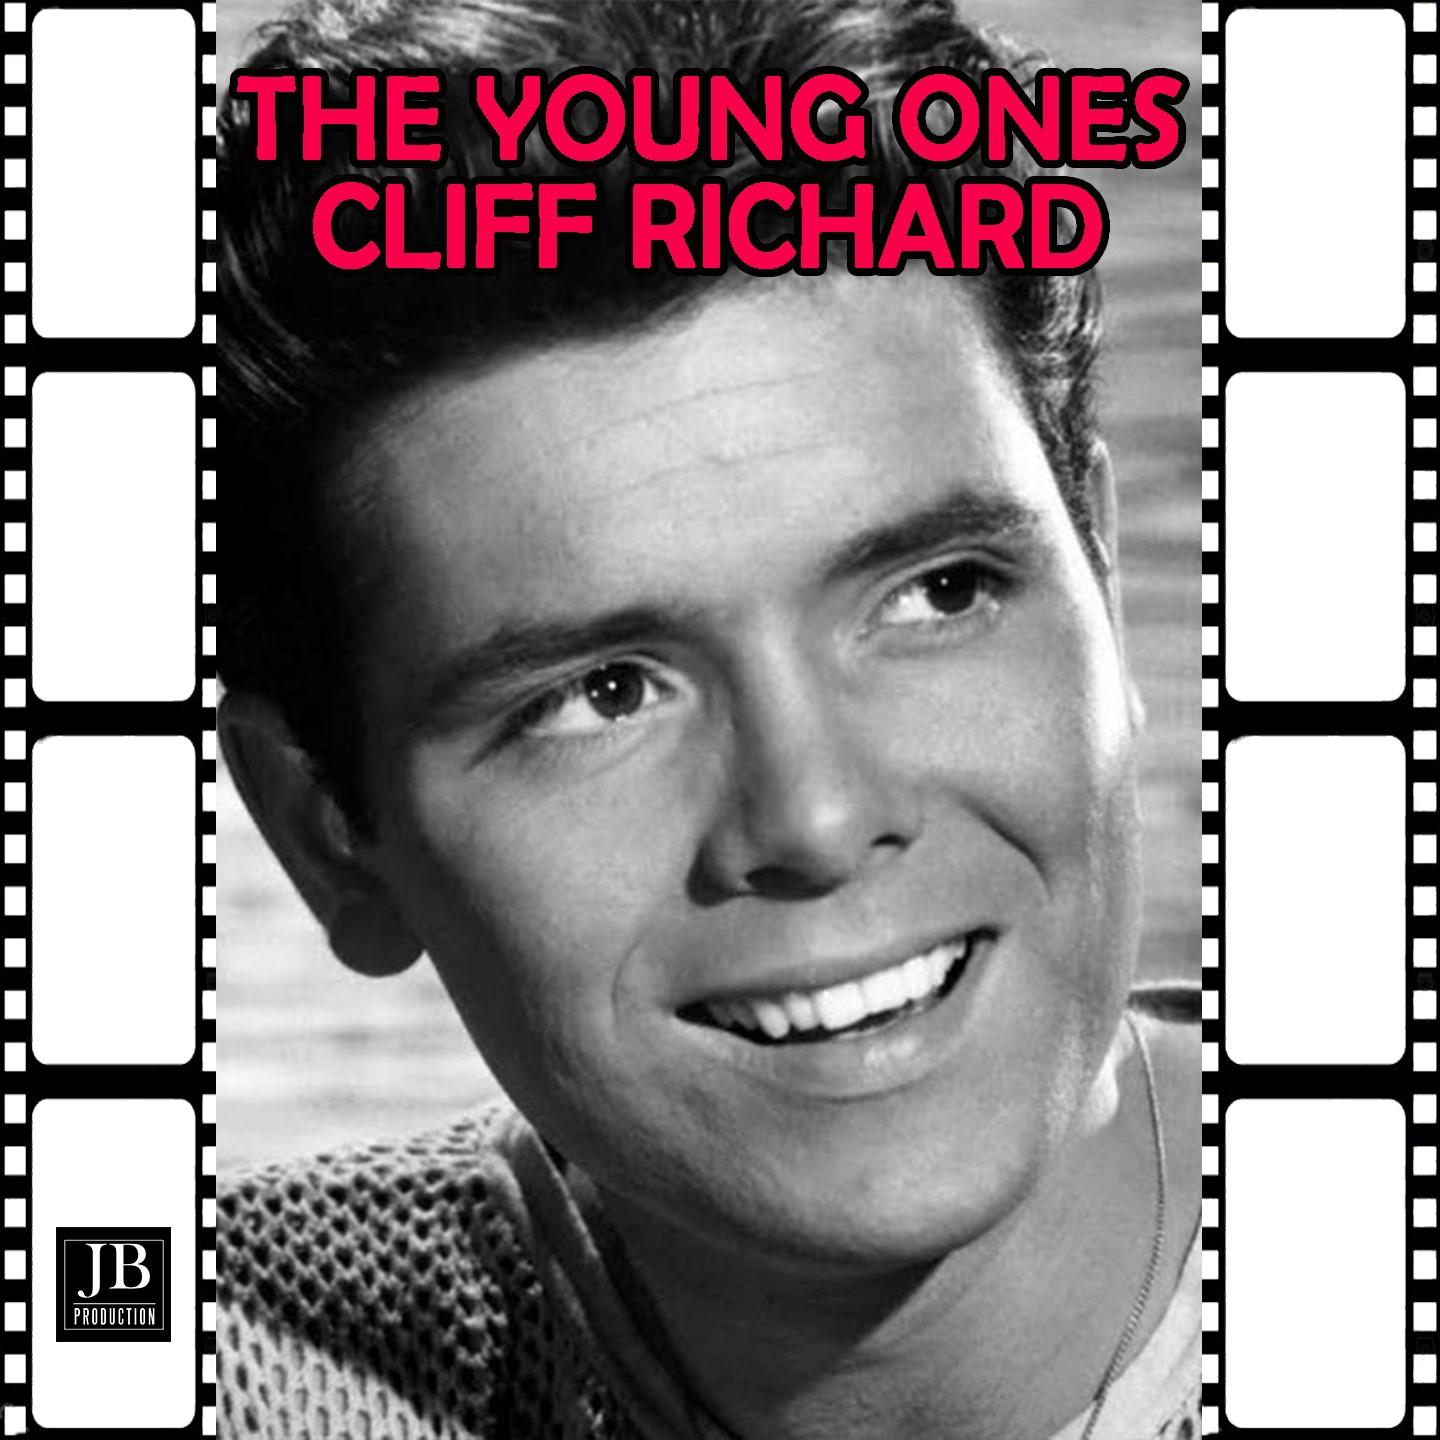 The Young Ones (Original Soundtrack 1961)